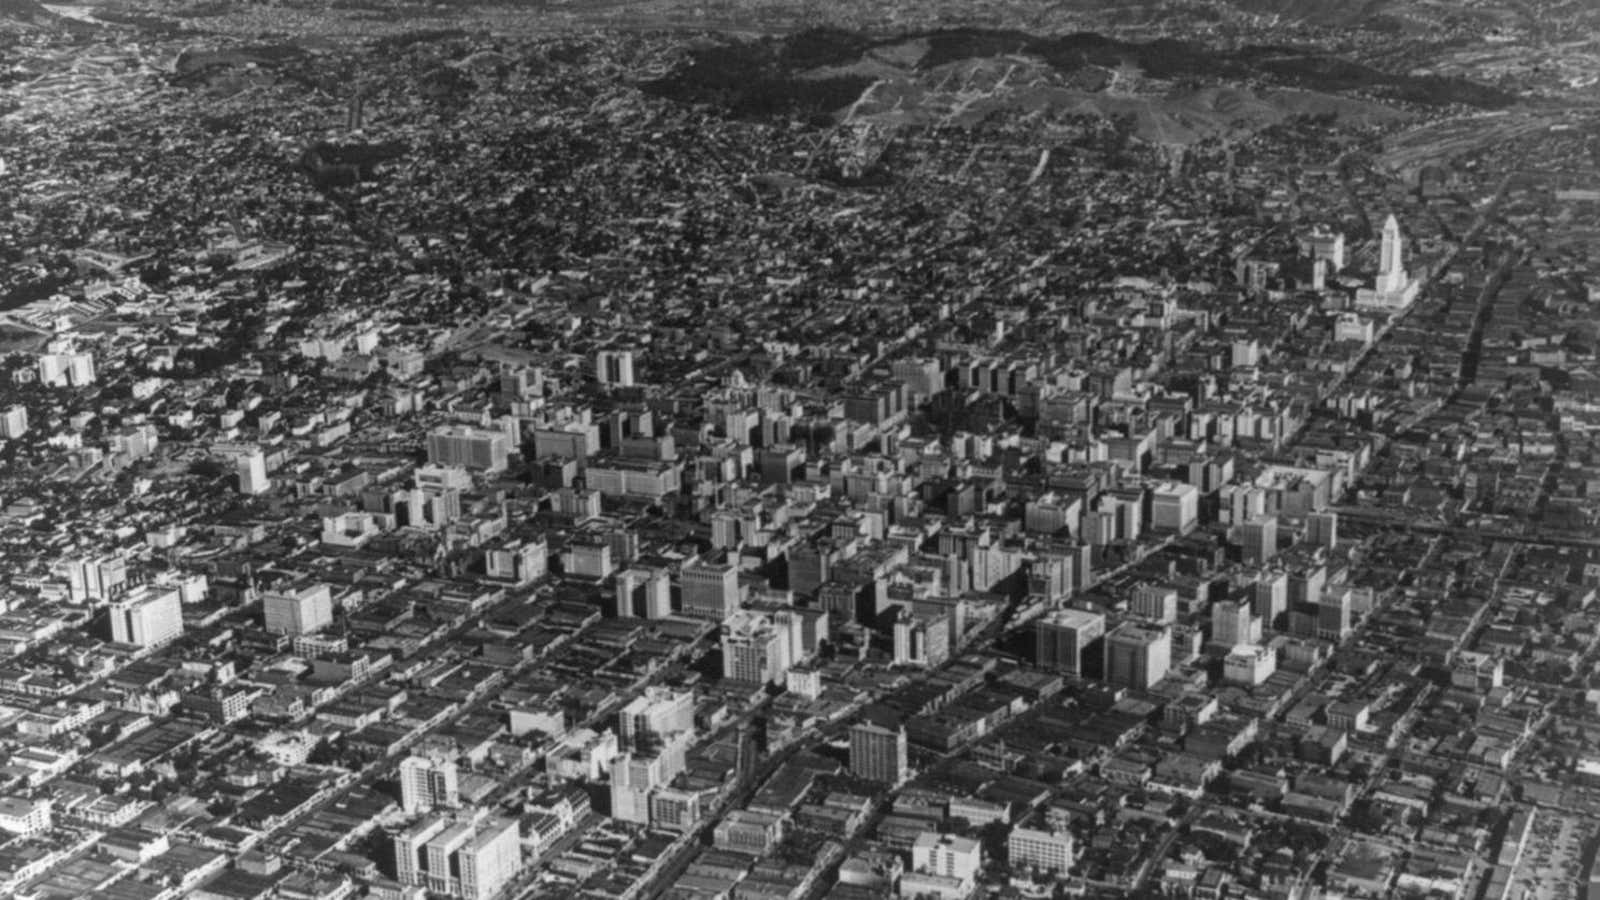 A 1928 view of Los Angeles.